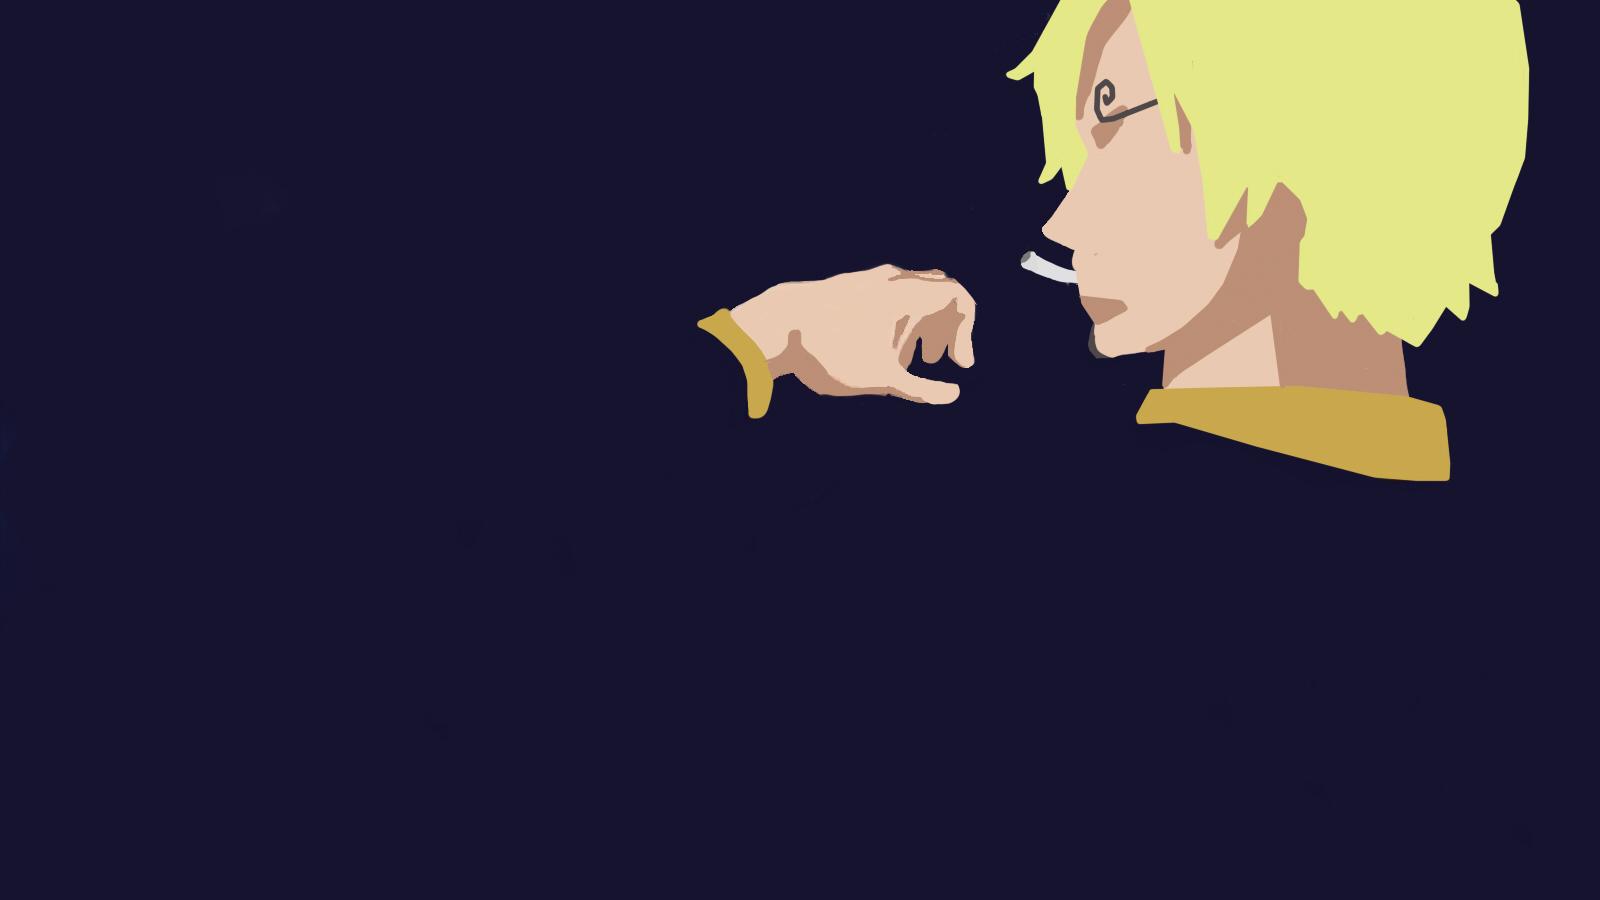 One Piece Minimalist Wallpapers - Wallpaper Cave